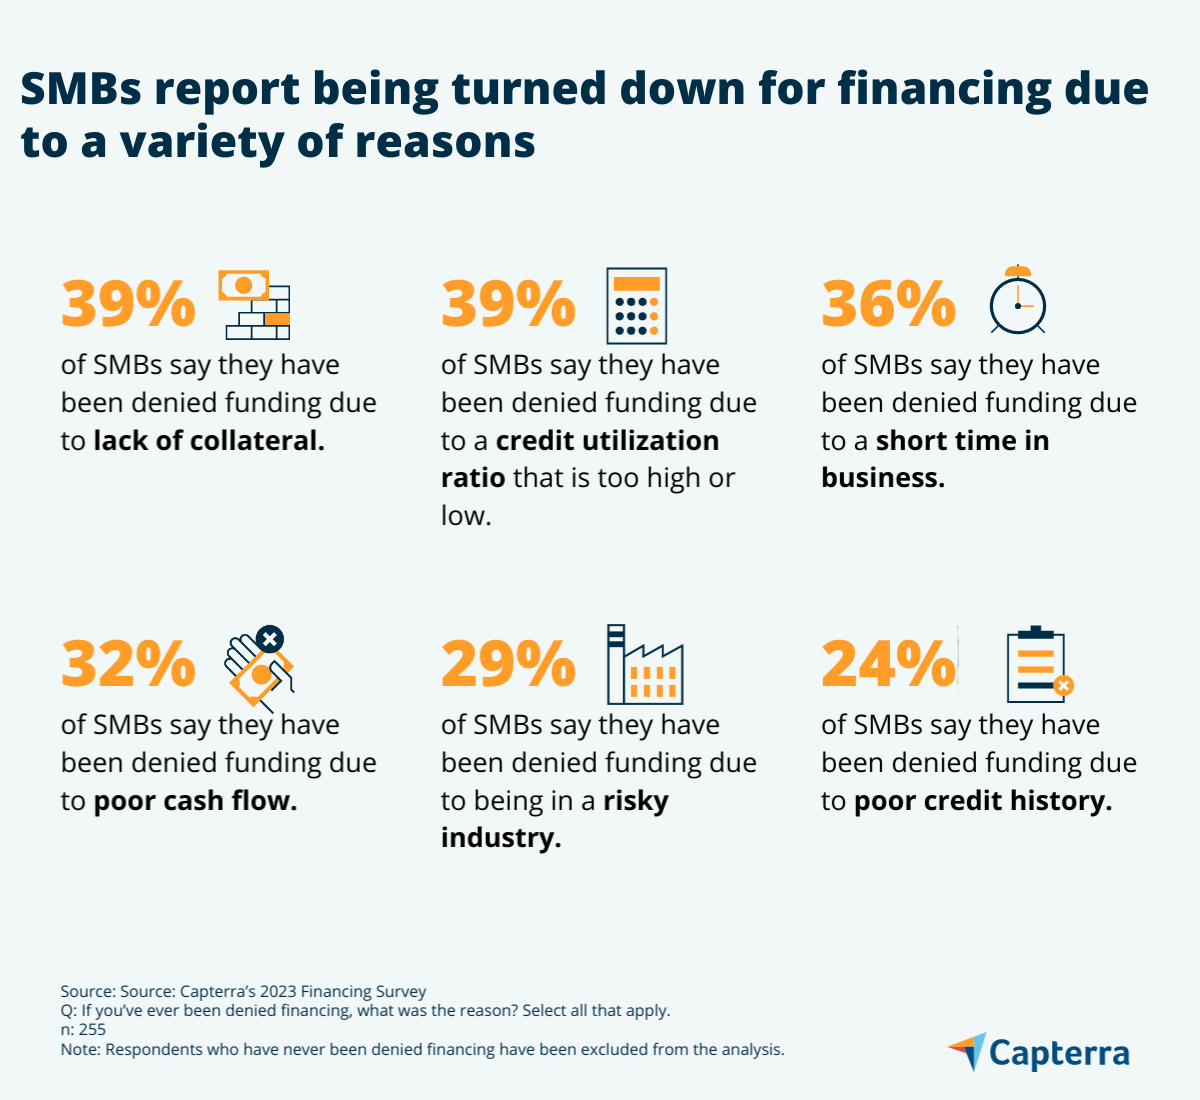 Financing denial reasons graphic for the blog article "Are Big Banks Still the Best Partners for Small Businesses? SMBs Explore Alternative Lenders"